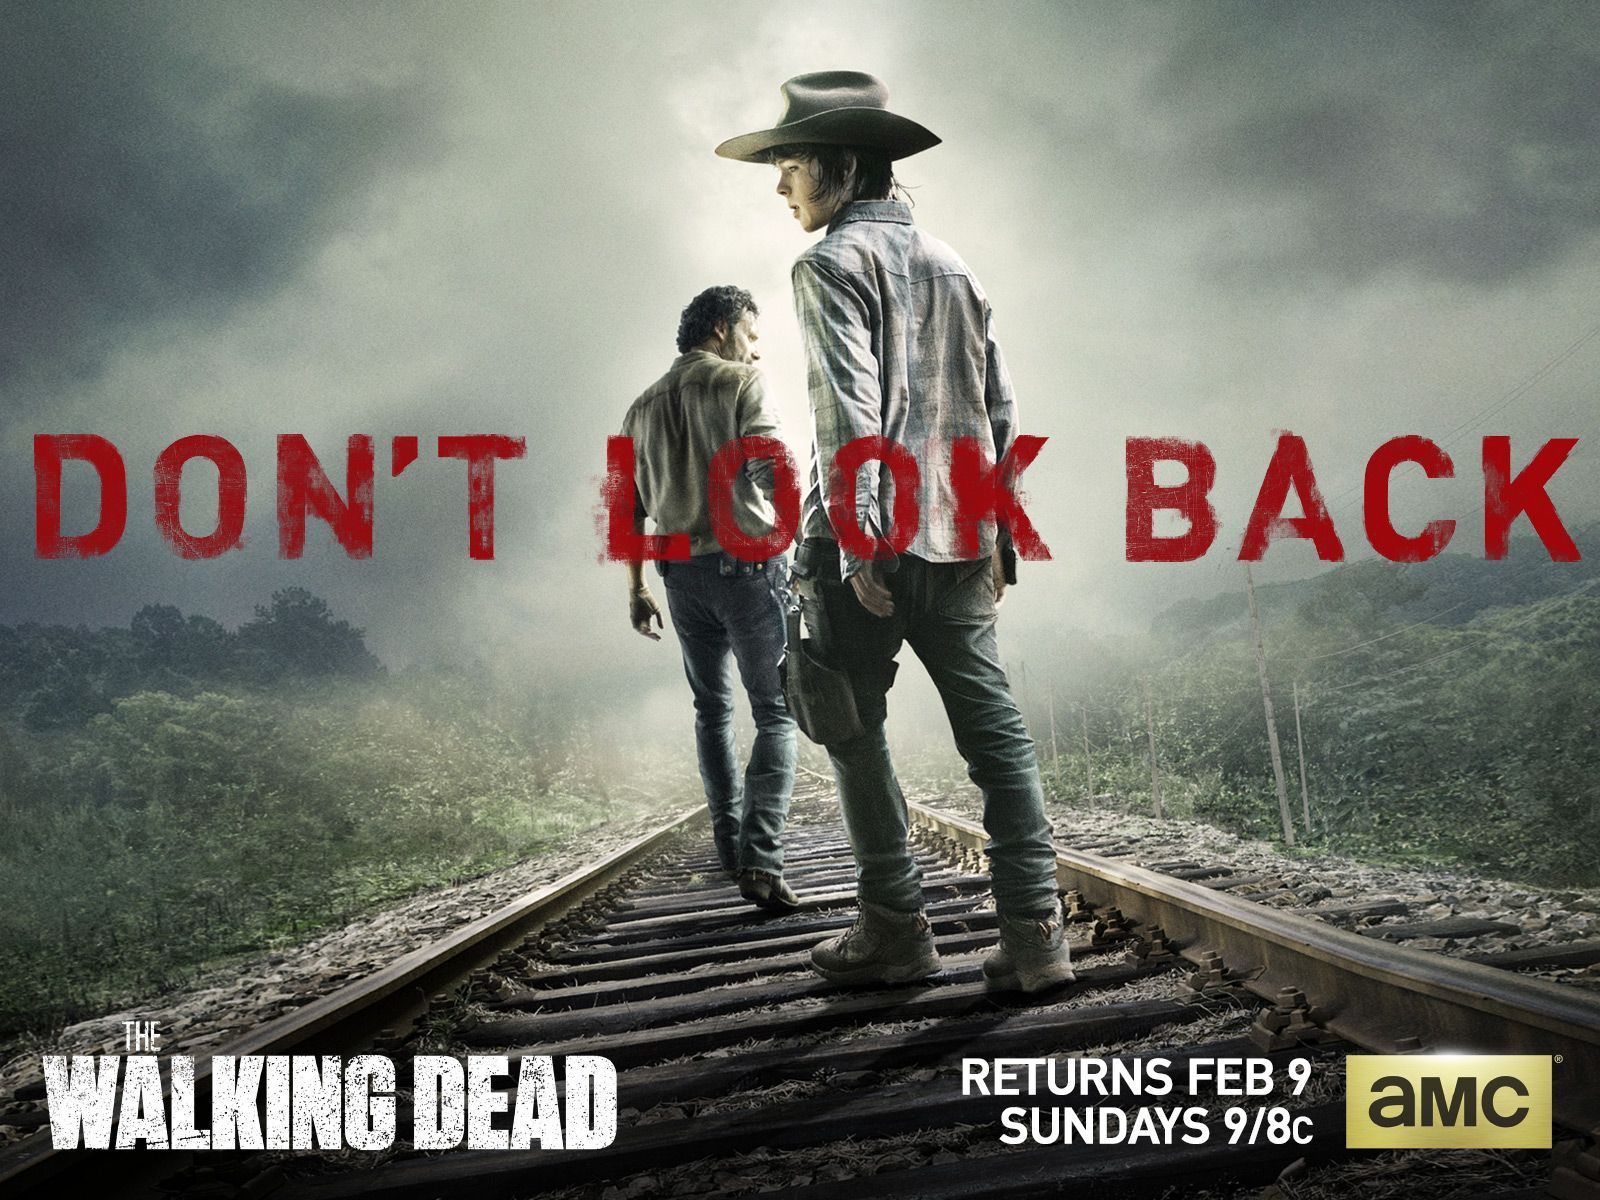 The Walking Dead Season 4 wallpaper with Carl and Rick | Movie ...